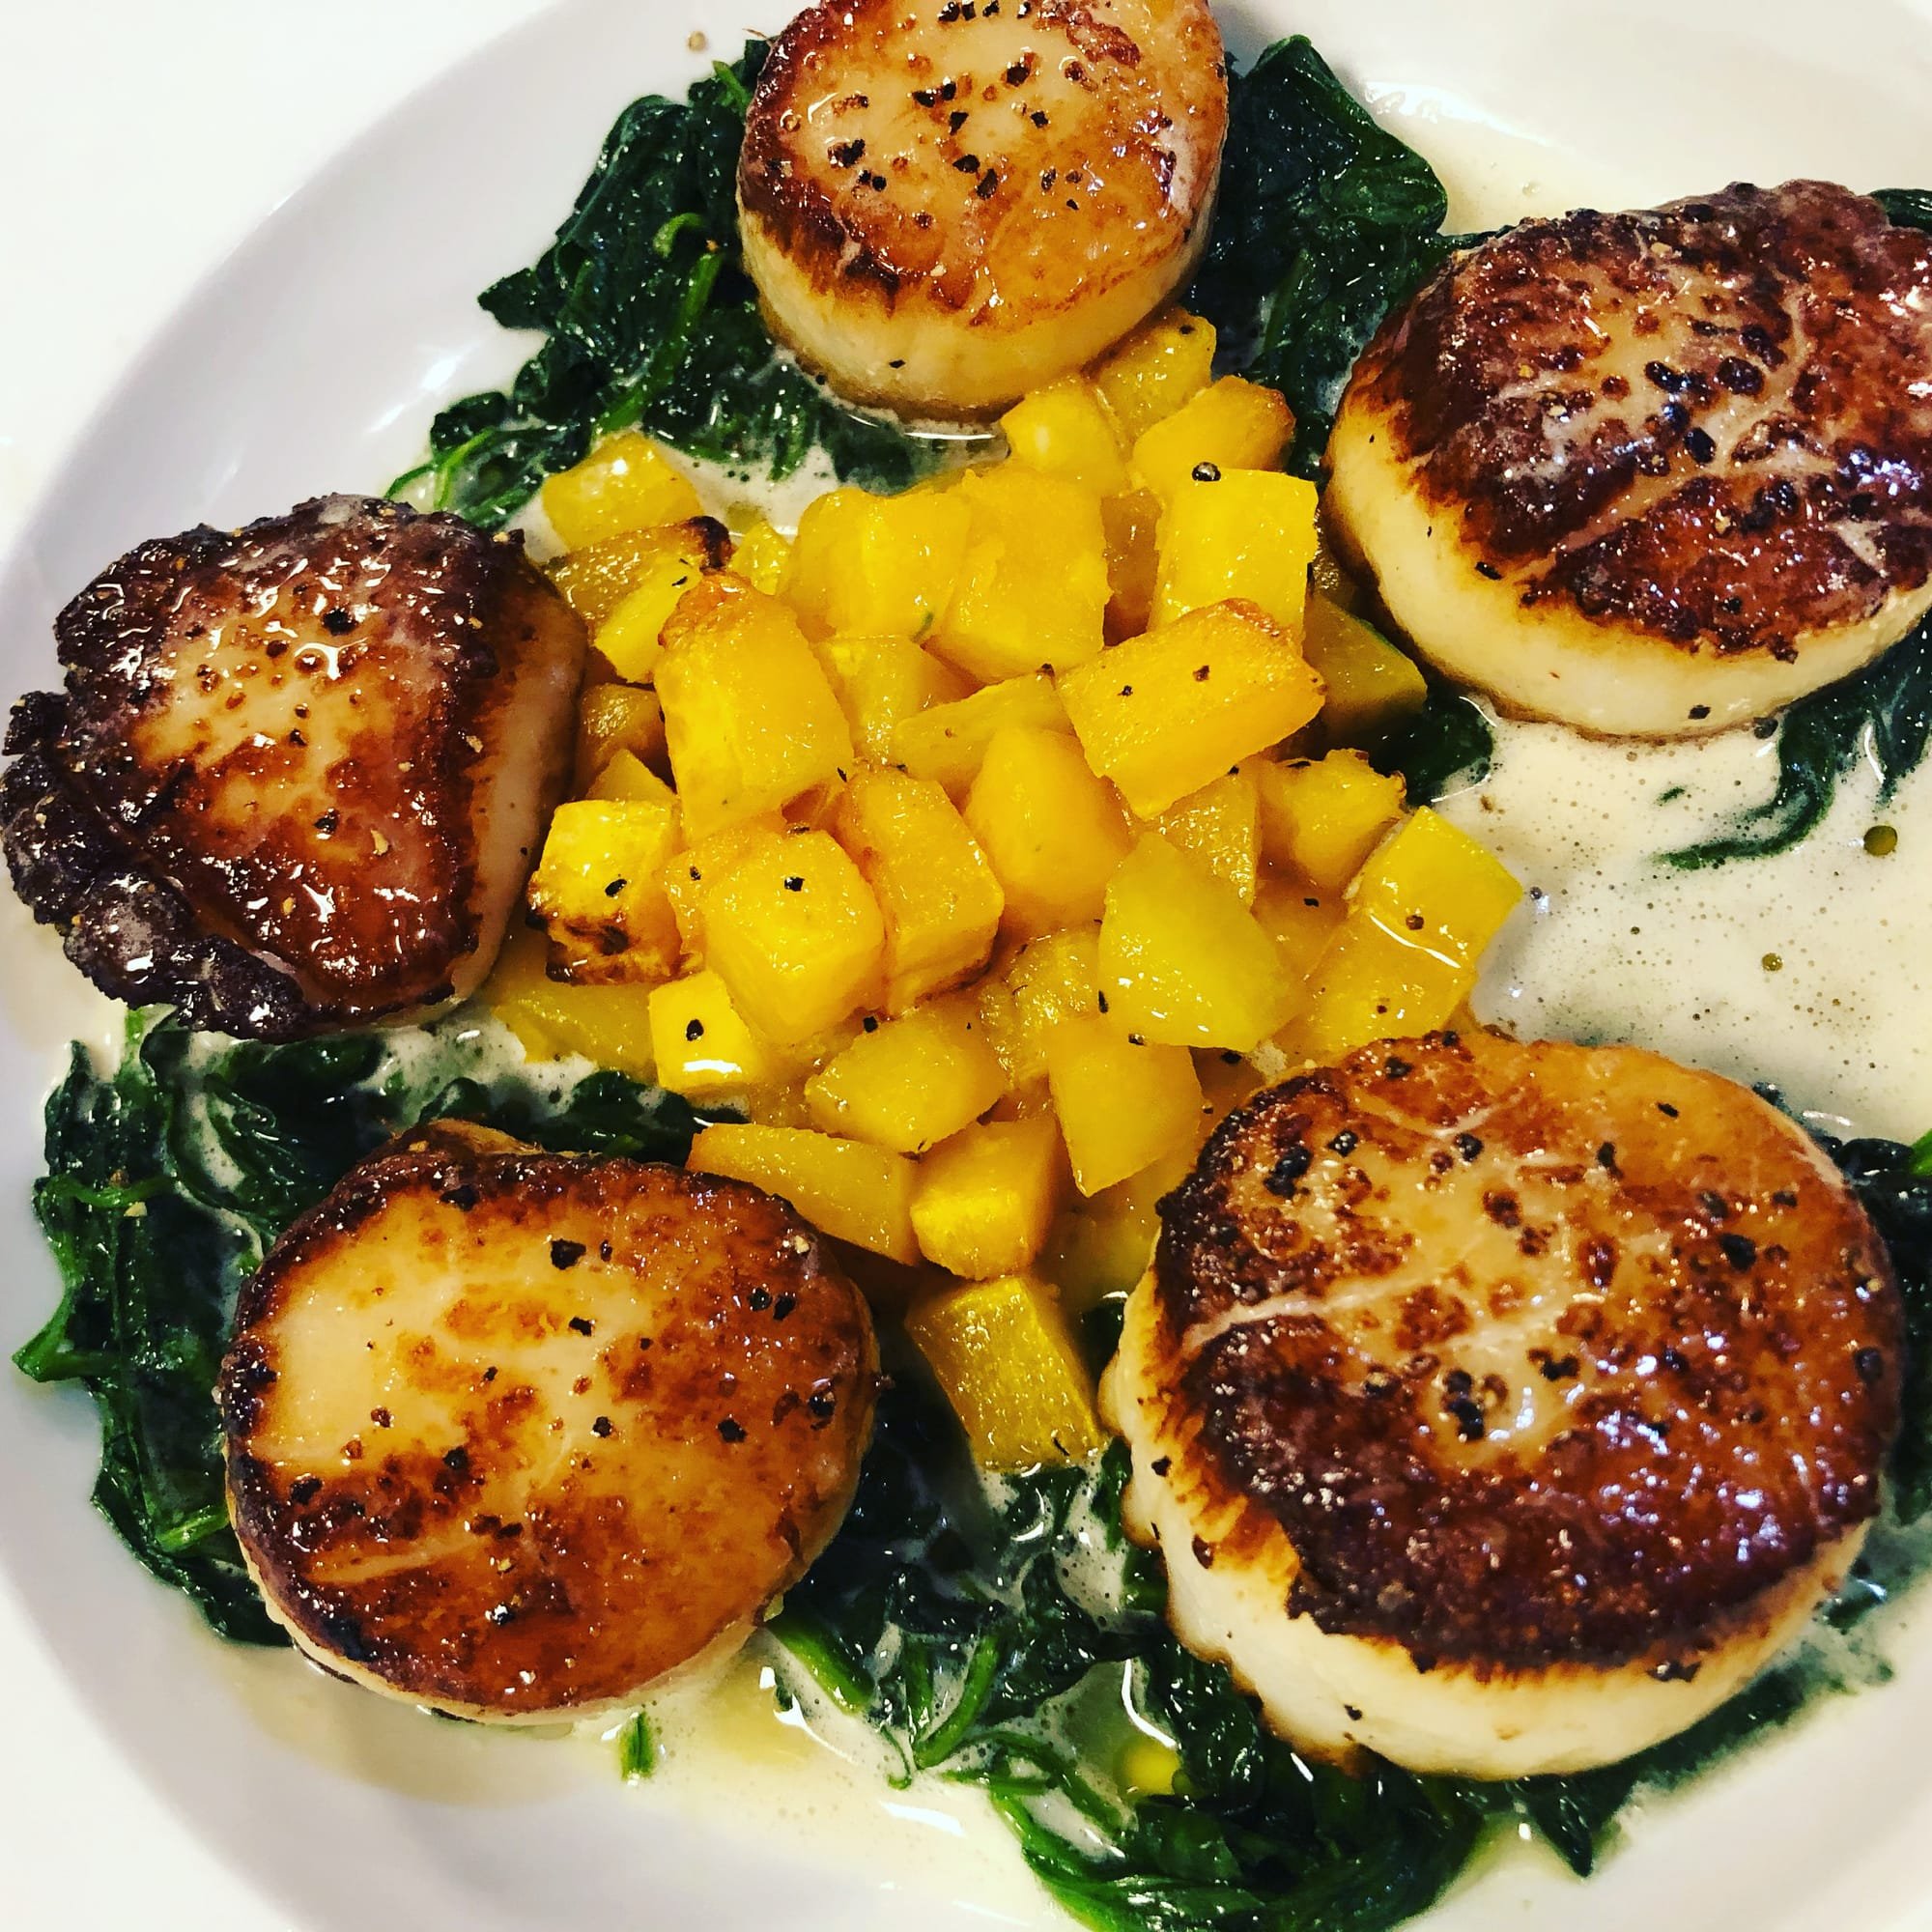 Pan Seared Scallops with Spinach & Butternut Squash